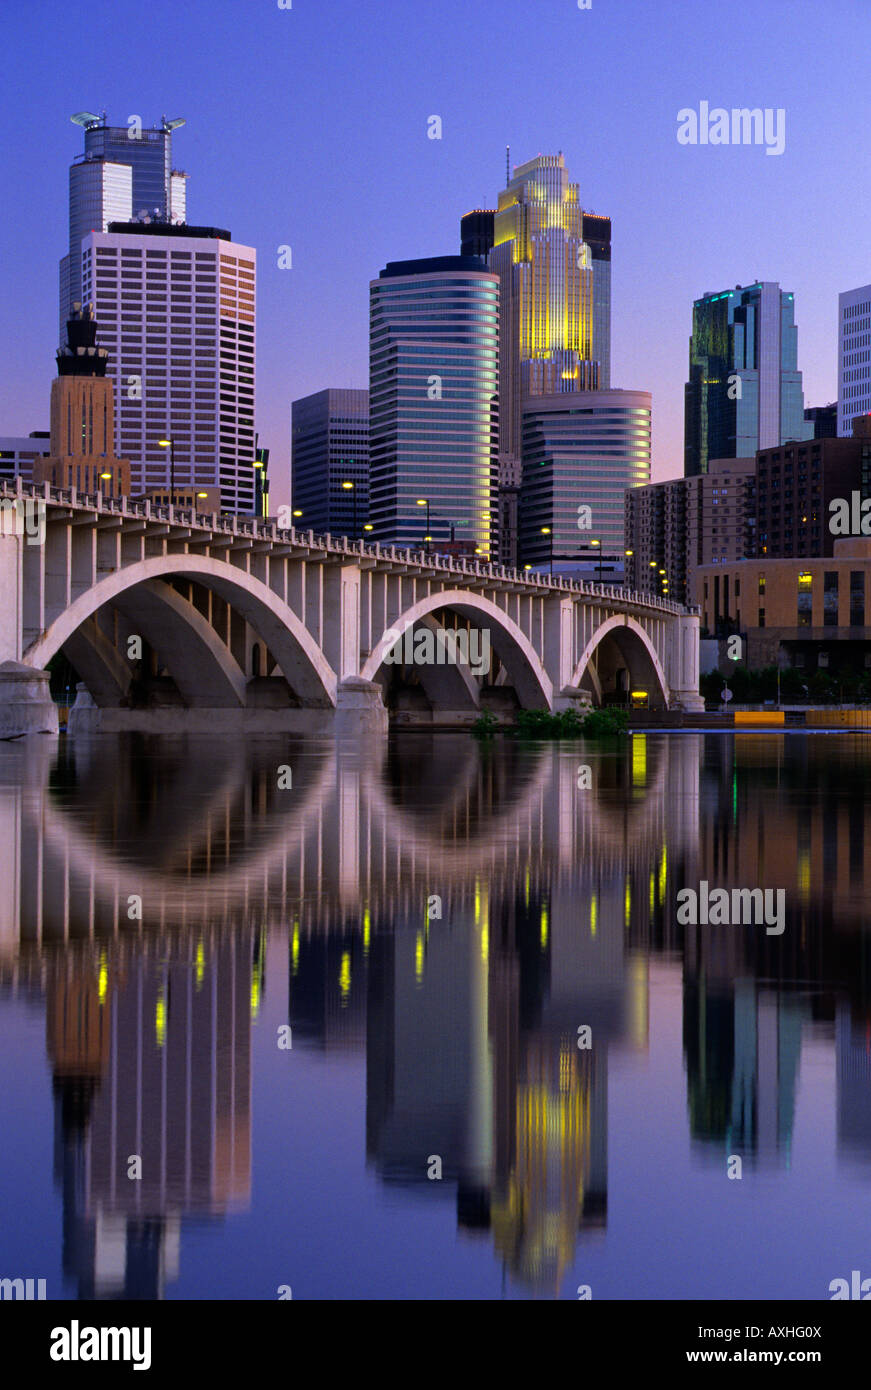 SKYLINE OF MINNEAPOLIS, MINNESOTA, THE MISSISSIPPI RIVER AND THE THIRD AVENUE-CENTRAL AVENUE BRIDGE.  DUSK; SUMMER. Stock Photo